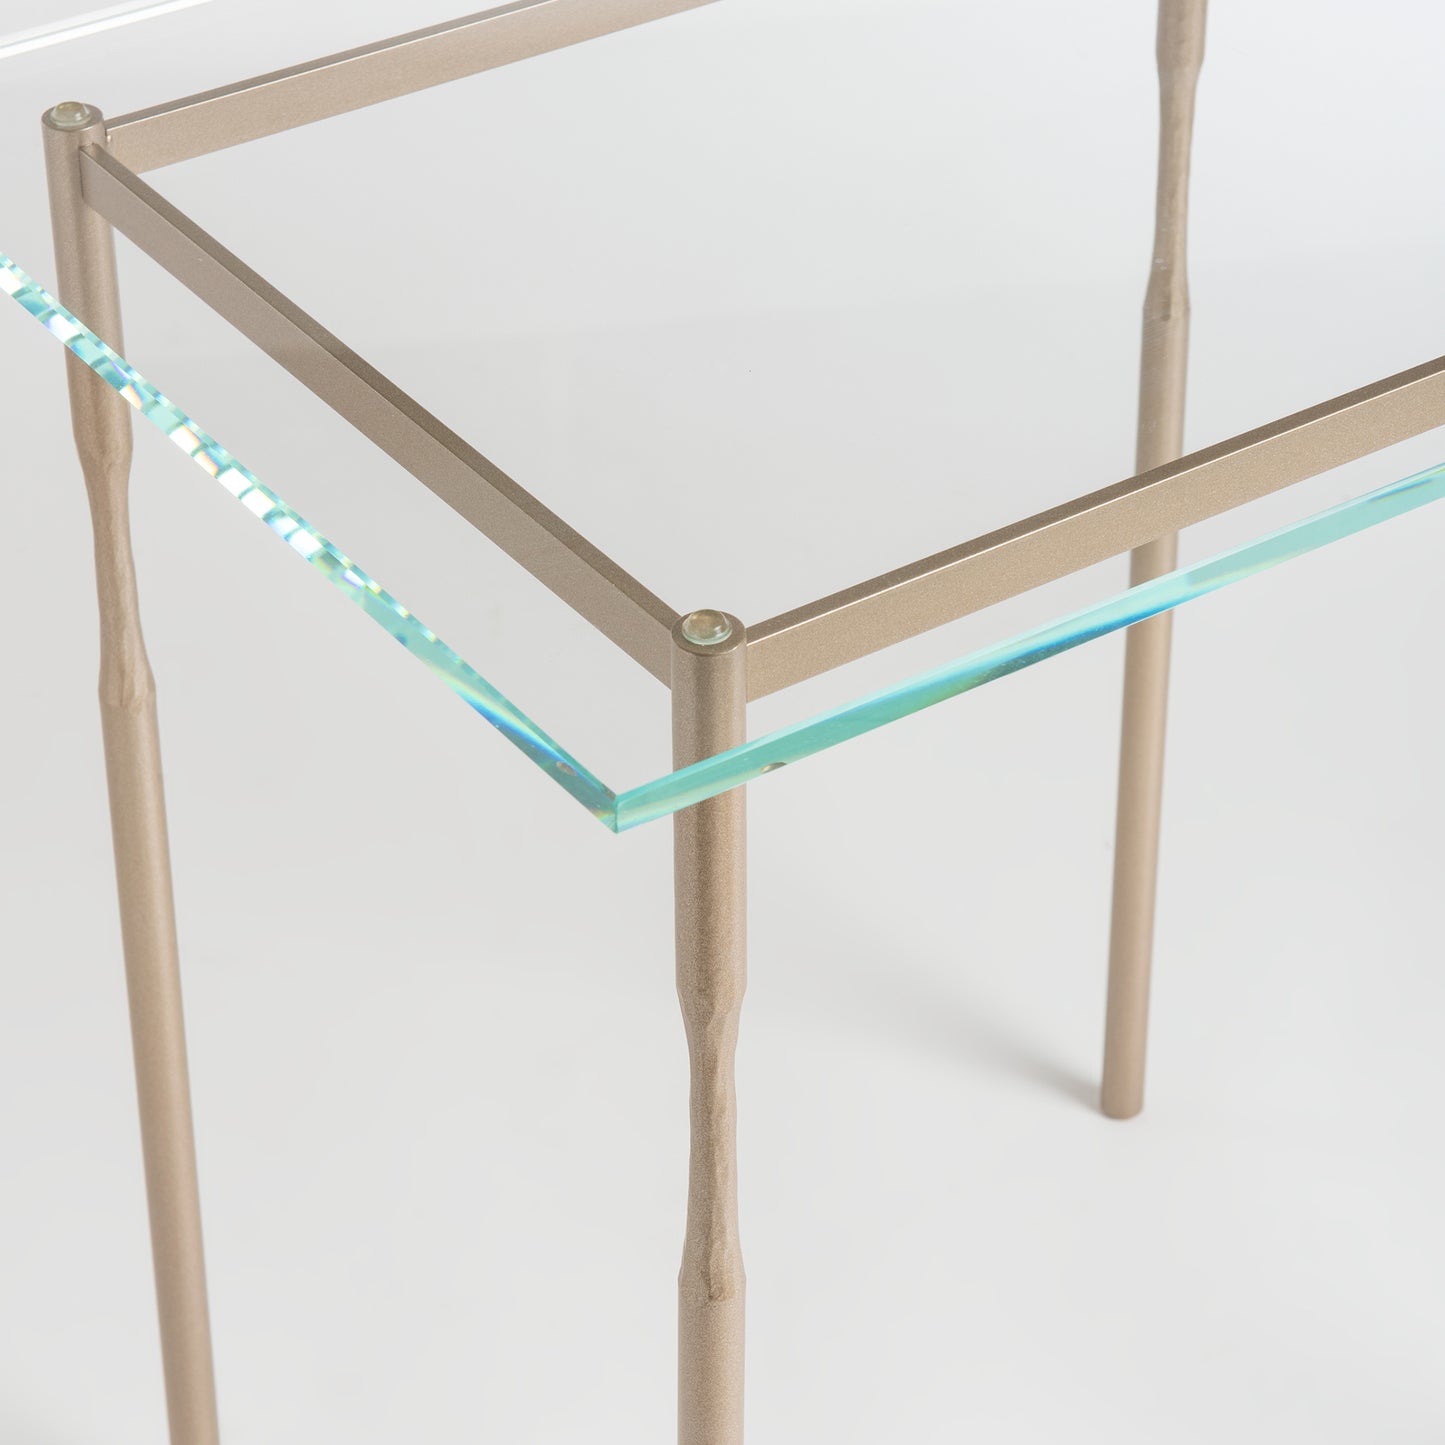 The Hubbardton Forge Senza Side Table features a glass top and sleek metal legs, making it a perfect addition to any modern home. With fine tailoring and exquisite design, this end table is both functional.